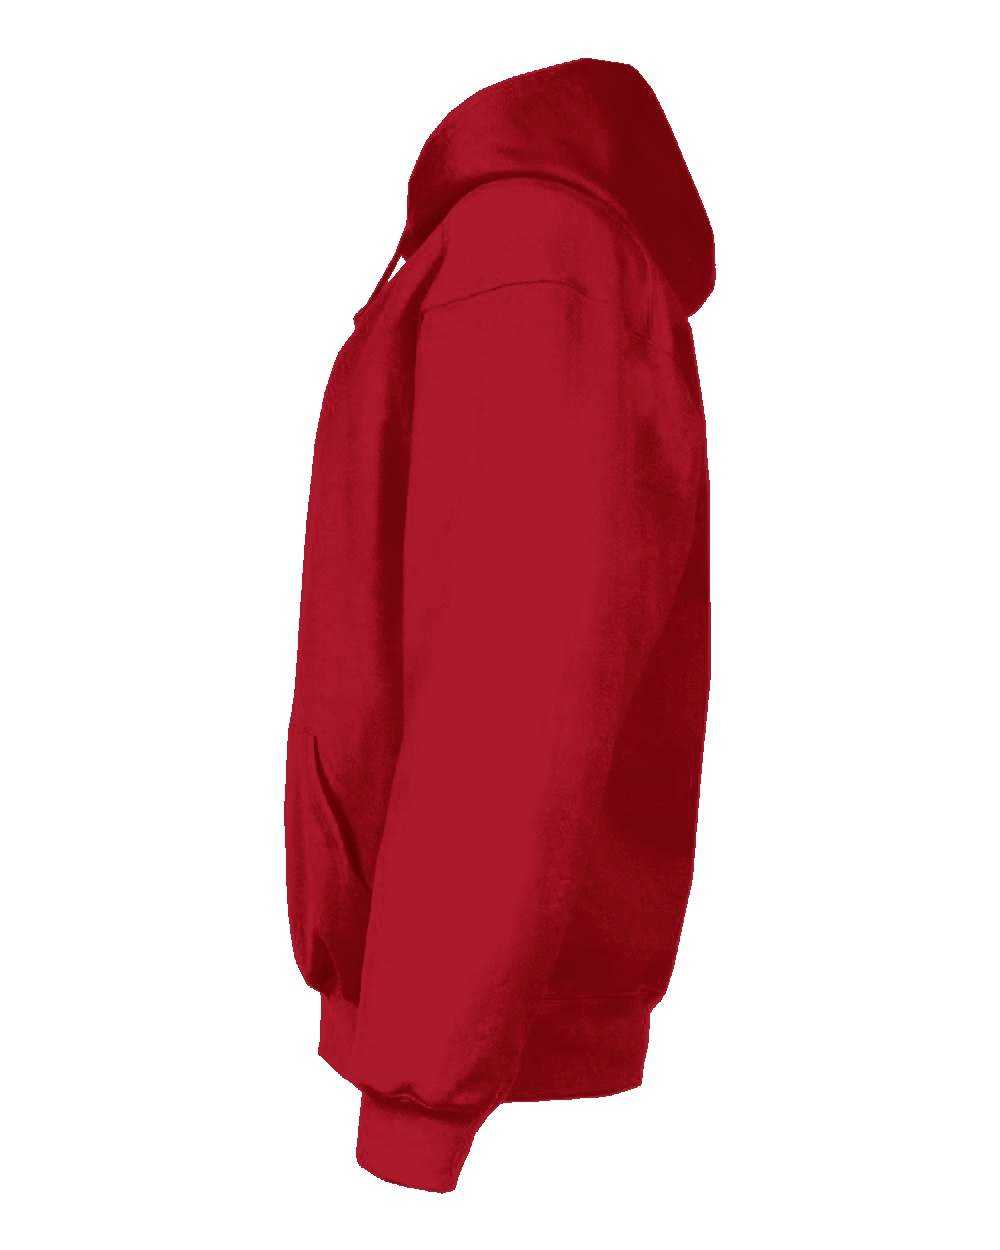 Badger Sport 2254 Youth Hooded Sweatshirt - Red - HIT a Double - 1